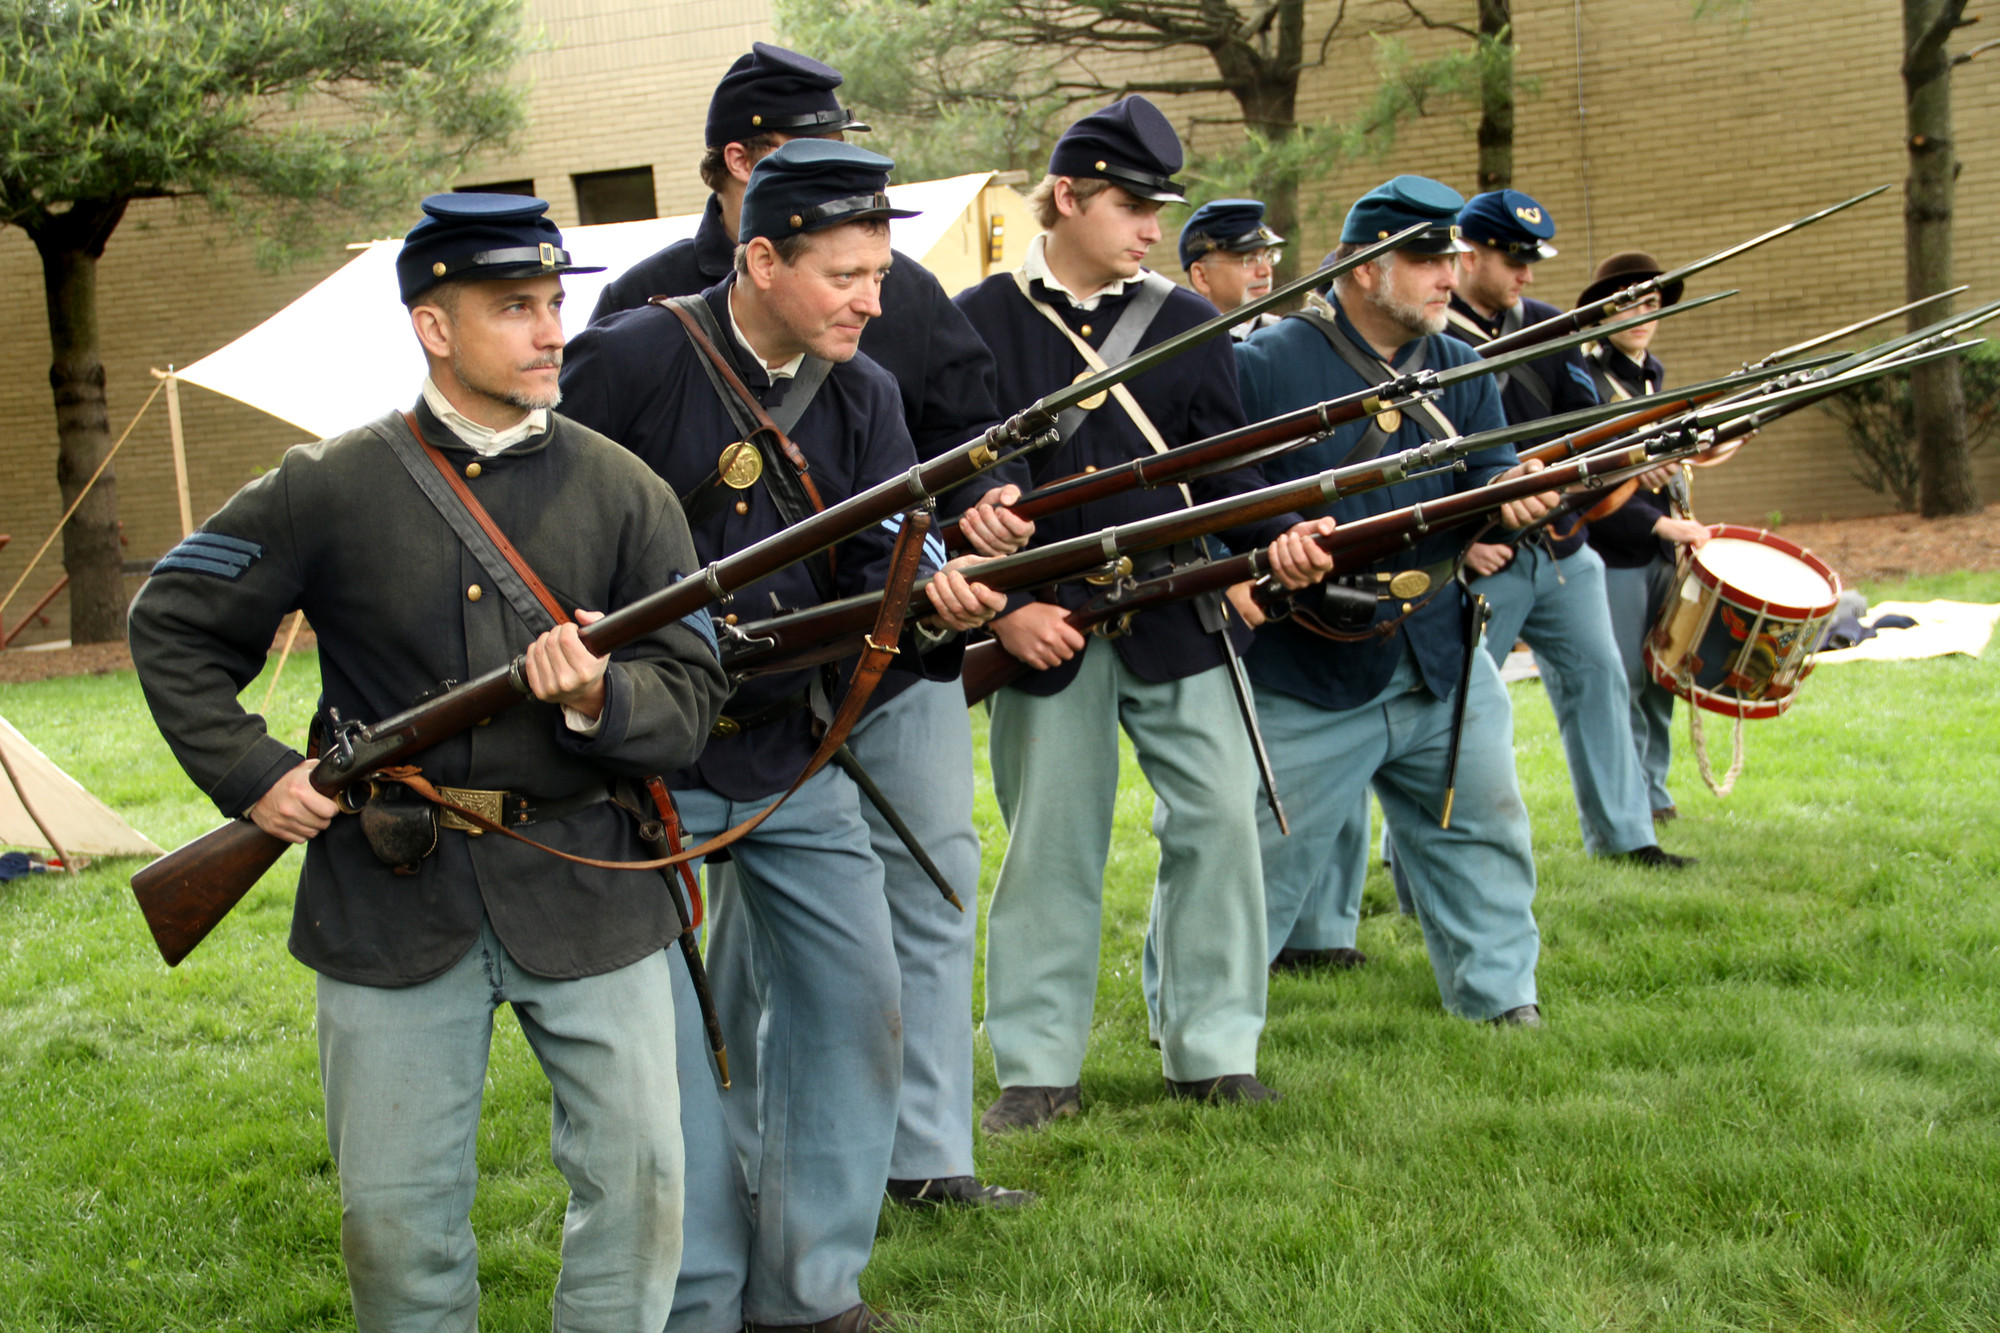 Sgt. Matthew Kenney, far left, led his Union soldiers in a bayonet charge drill at the East Meadow Public Library on May 31.